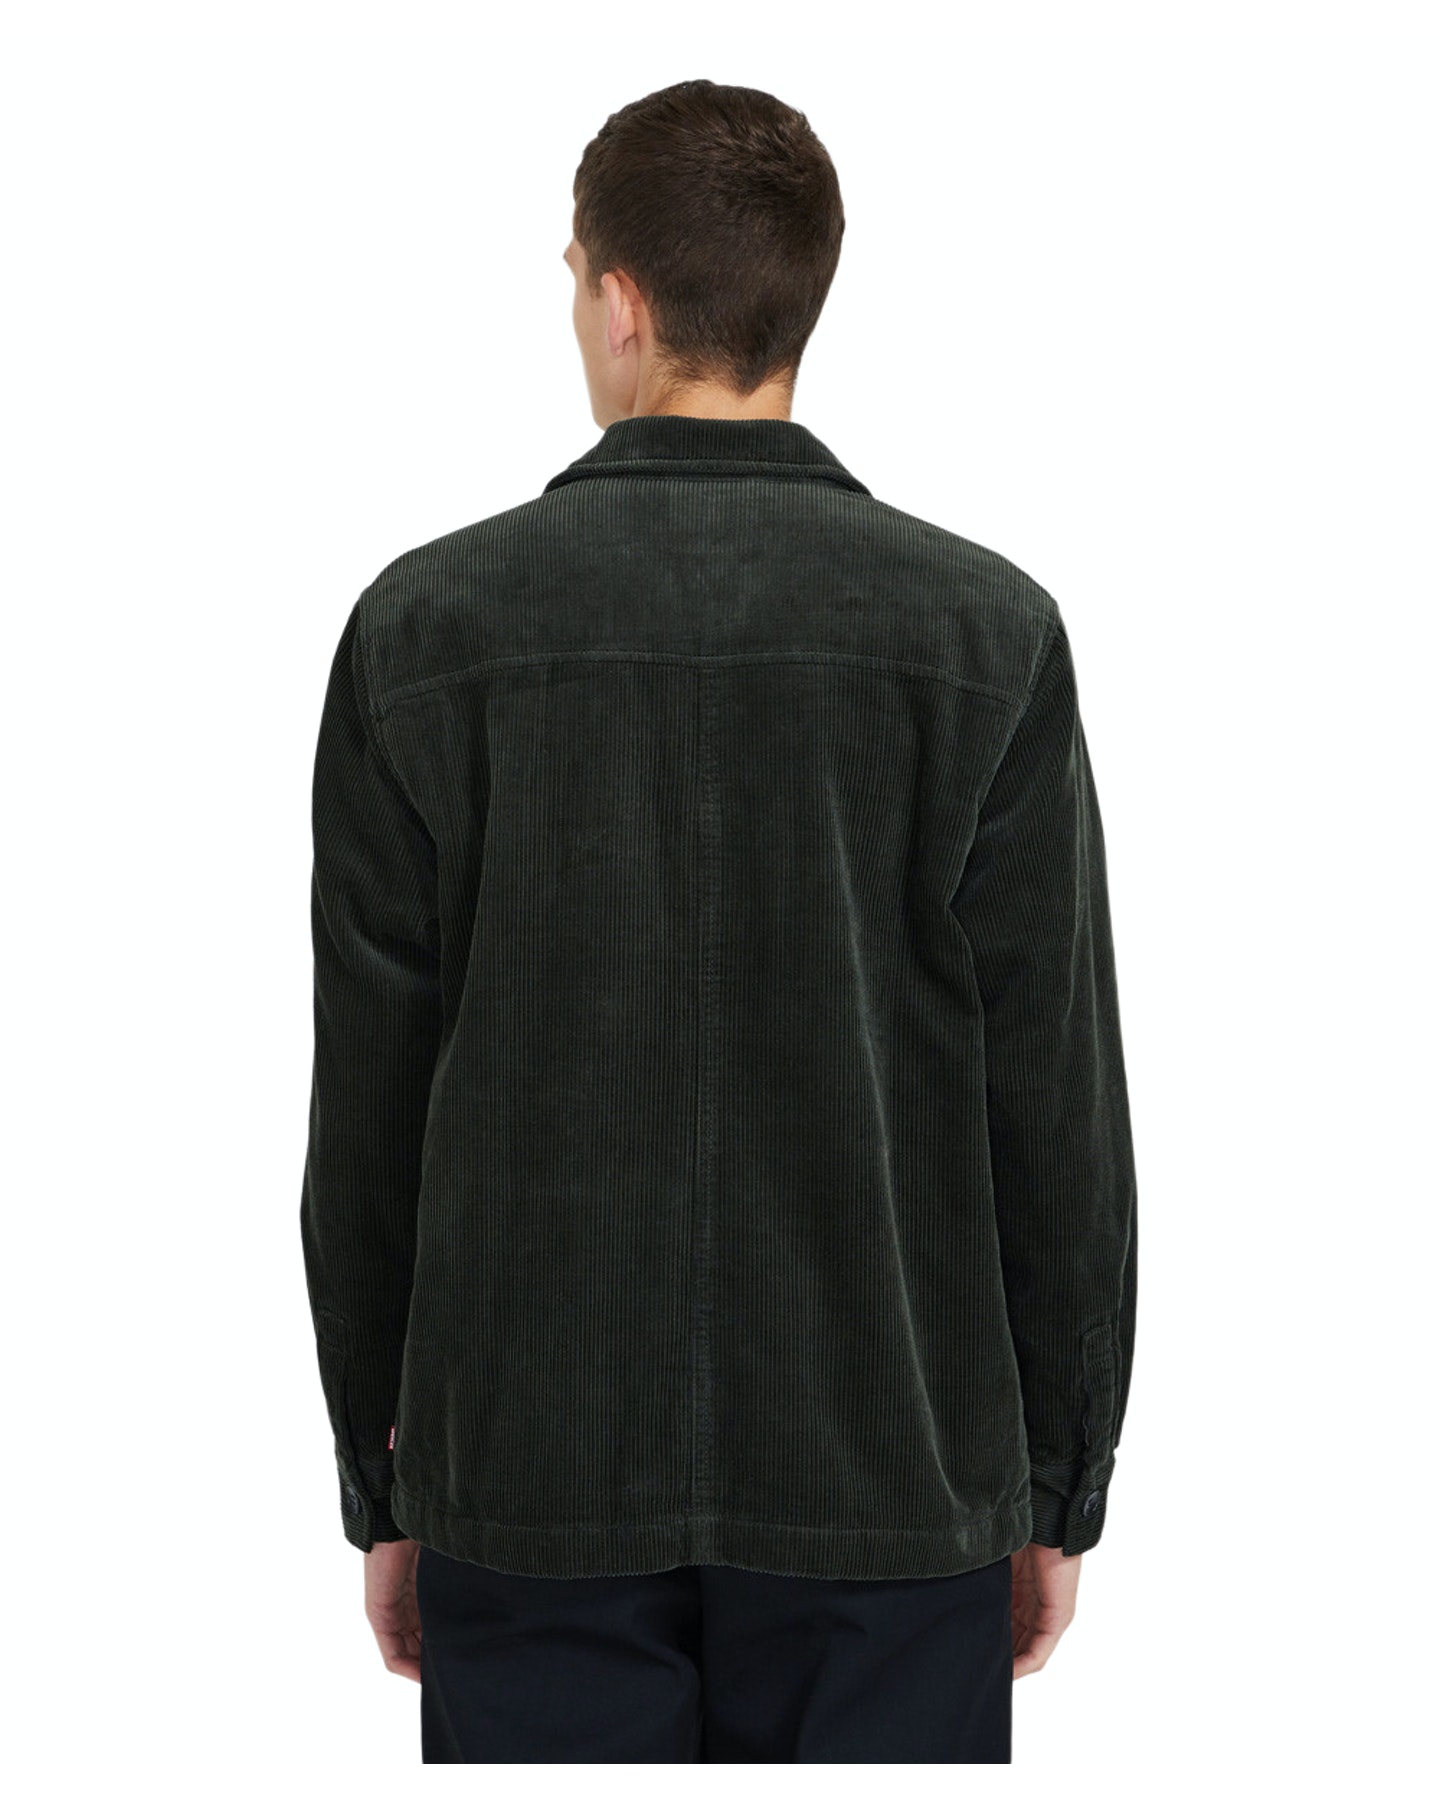 Spencer Project Cord Shirt Jacket - Green | SurfStitch